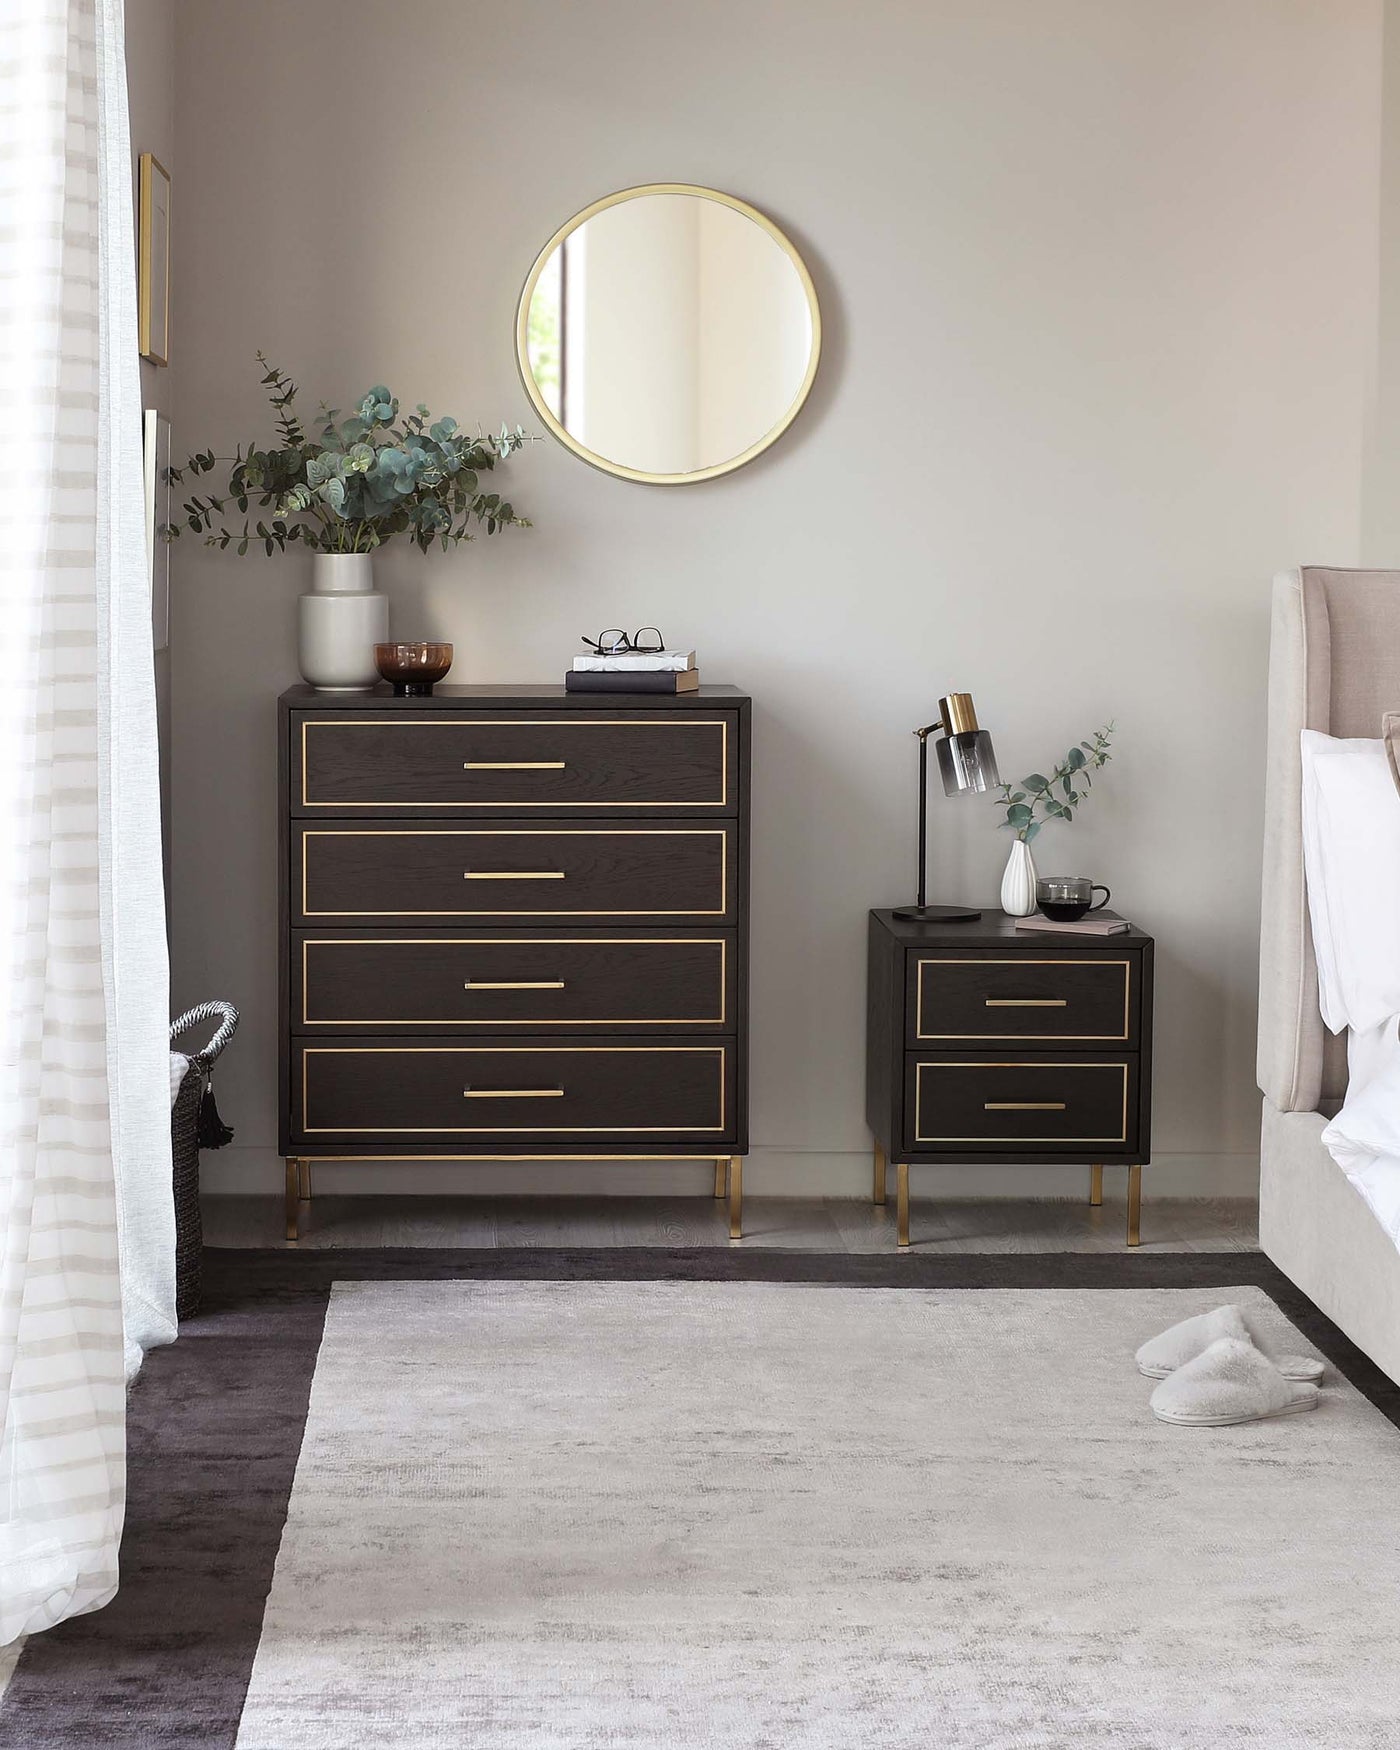 Elegant bedroom furniture set with a dark wood finish and gold metal accents. The collection includes a tall five-drawer dresser and a two-drawer nightstand, both featuring sleek handles and raised on tapered legs. A simple, yet sophisticated design ideal for a modern home interior.